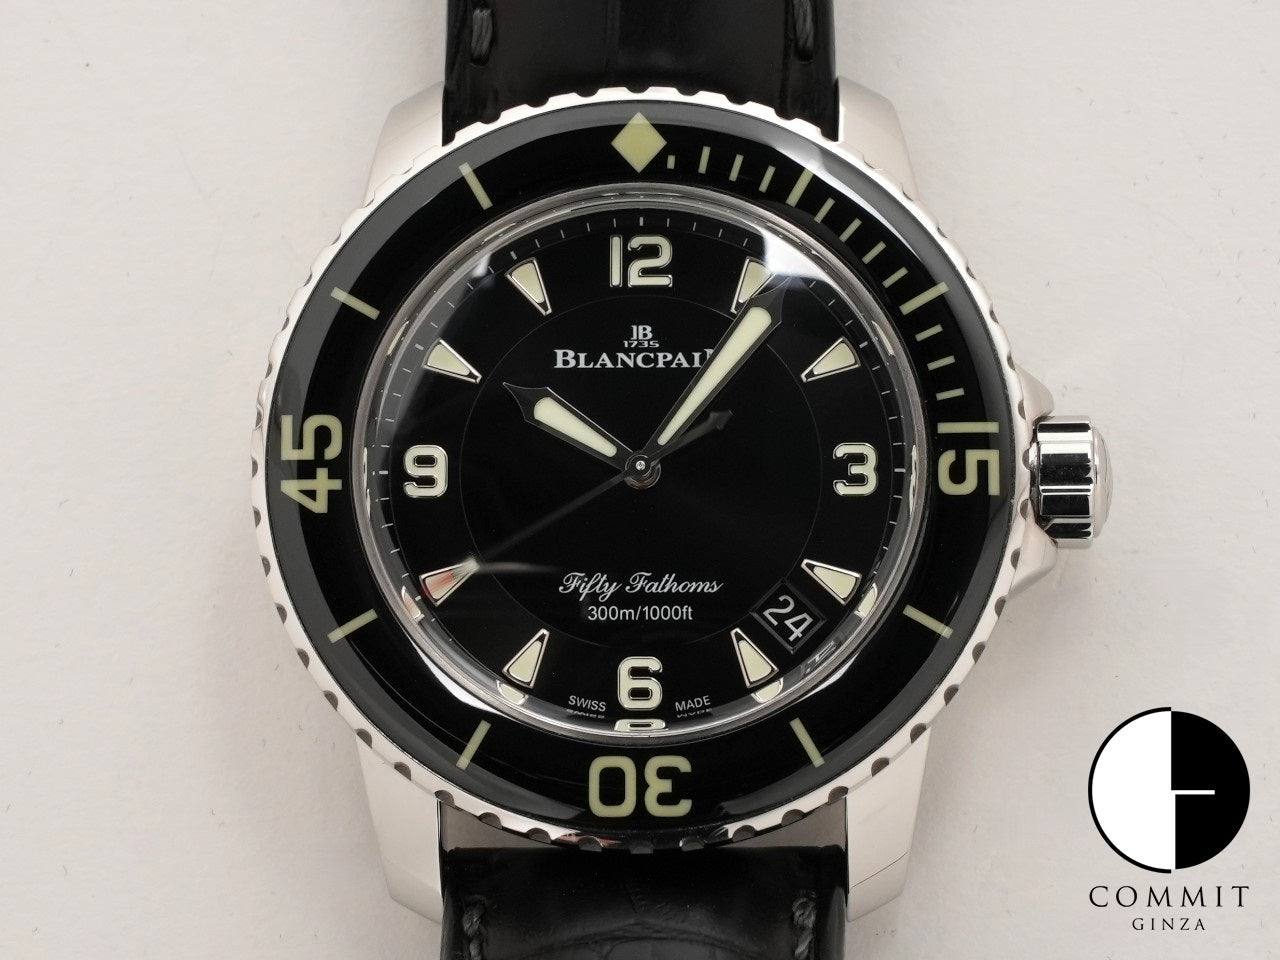 Blancpain Fifty Fathoms Ref.5015-1130-52A Stainless Steel Black Dial